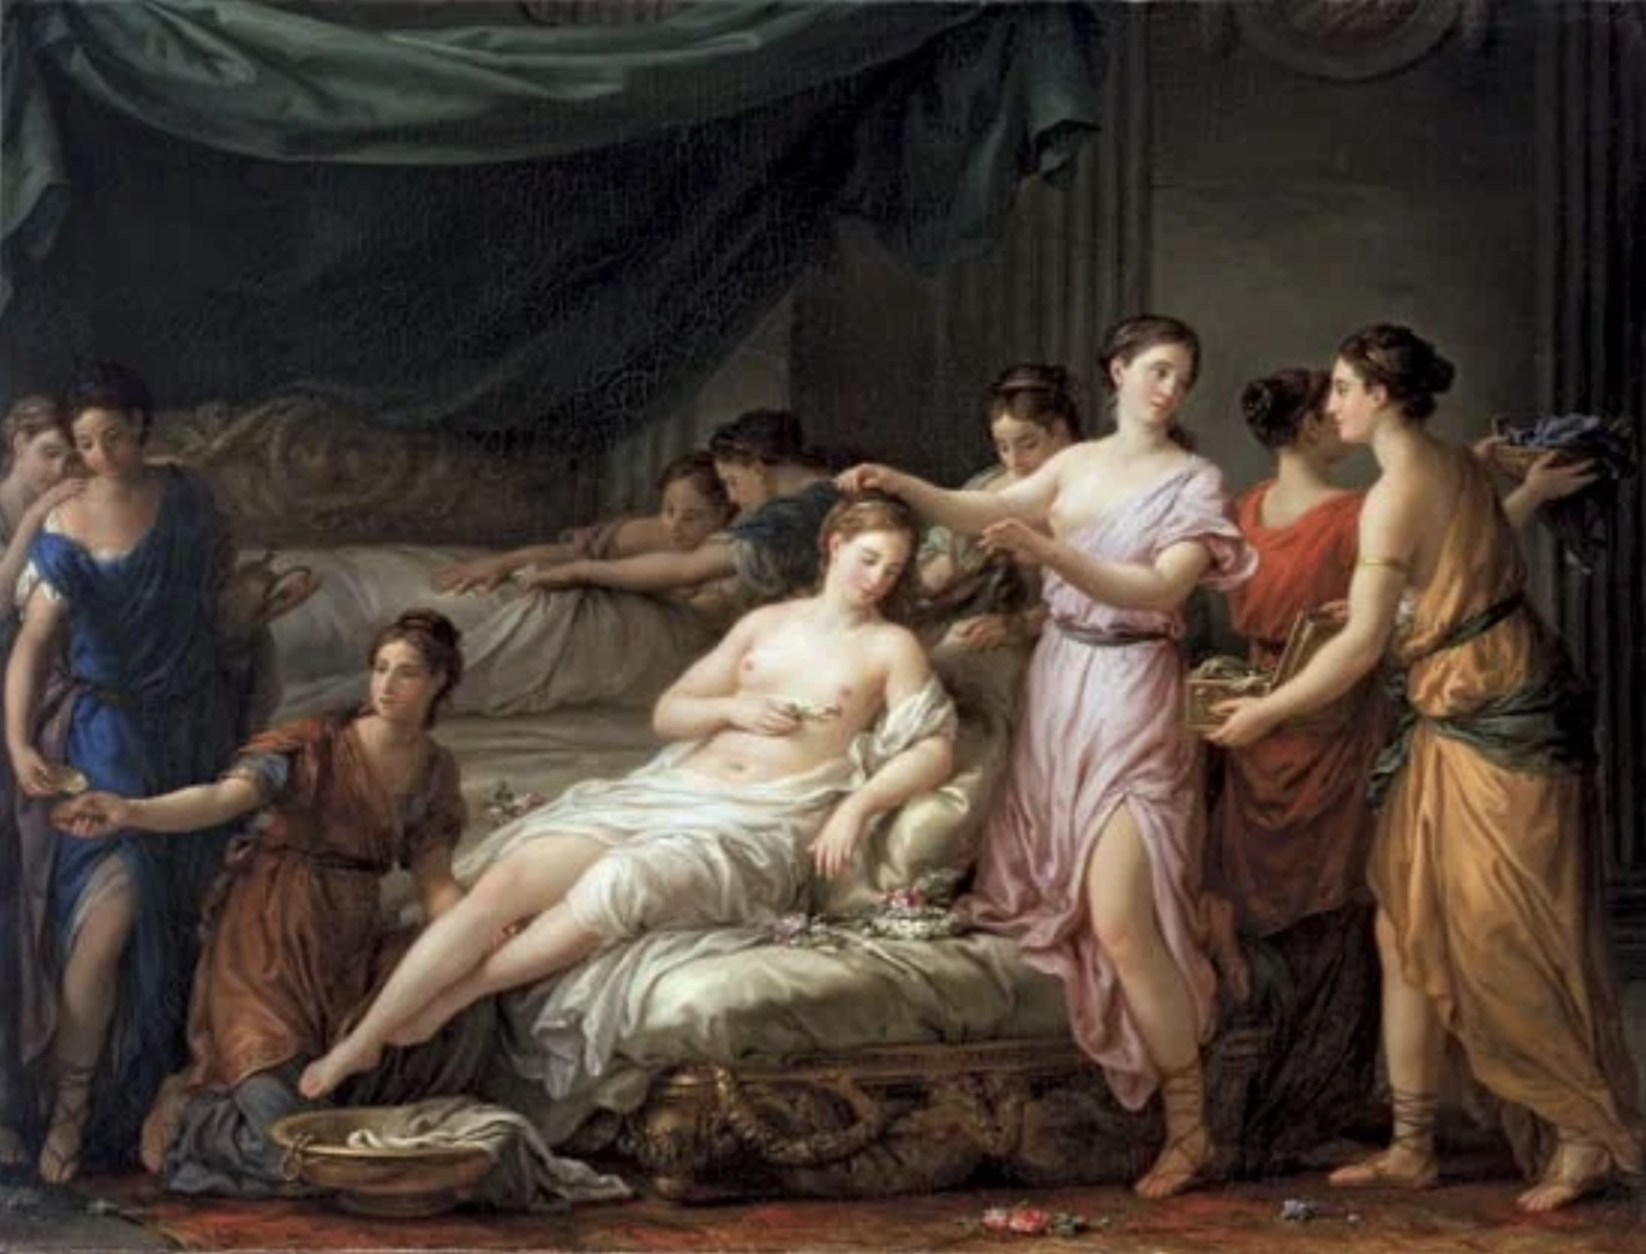 The Toilette of a Bride in Ancient Dress, oil on canvas by Joseph-Marie Vien, 1777.